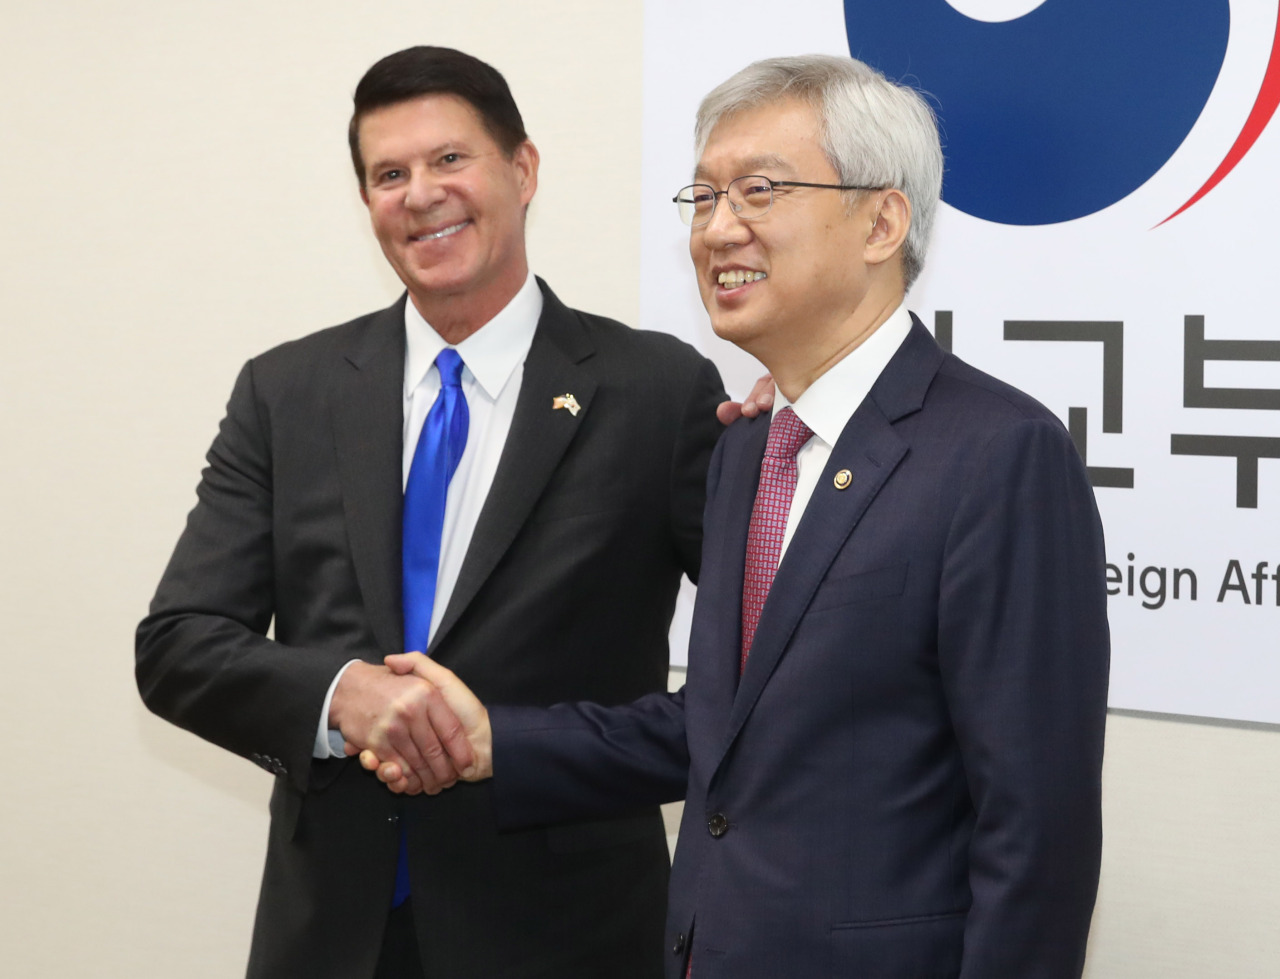 South Korea's Vice Foreign Minister Lee Tae-ho shakes hands with US Under Secretary of State for Economic Growth, Energy, and the Environment Keith Krach during the 4th Republic of Korea-United States Senior Economic Dialogue, held in Seoul on Wednesday. (Yonhap)